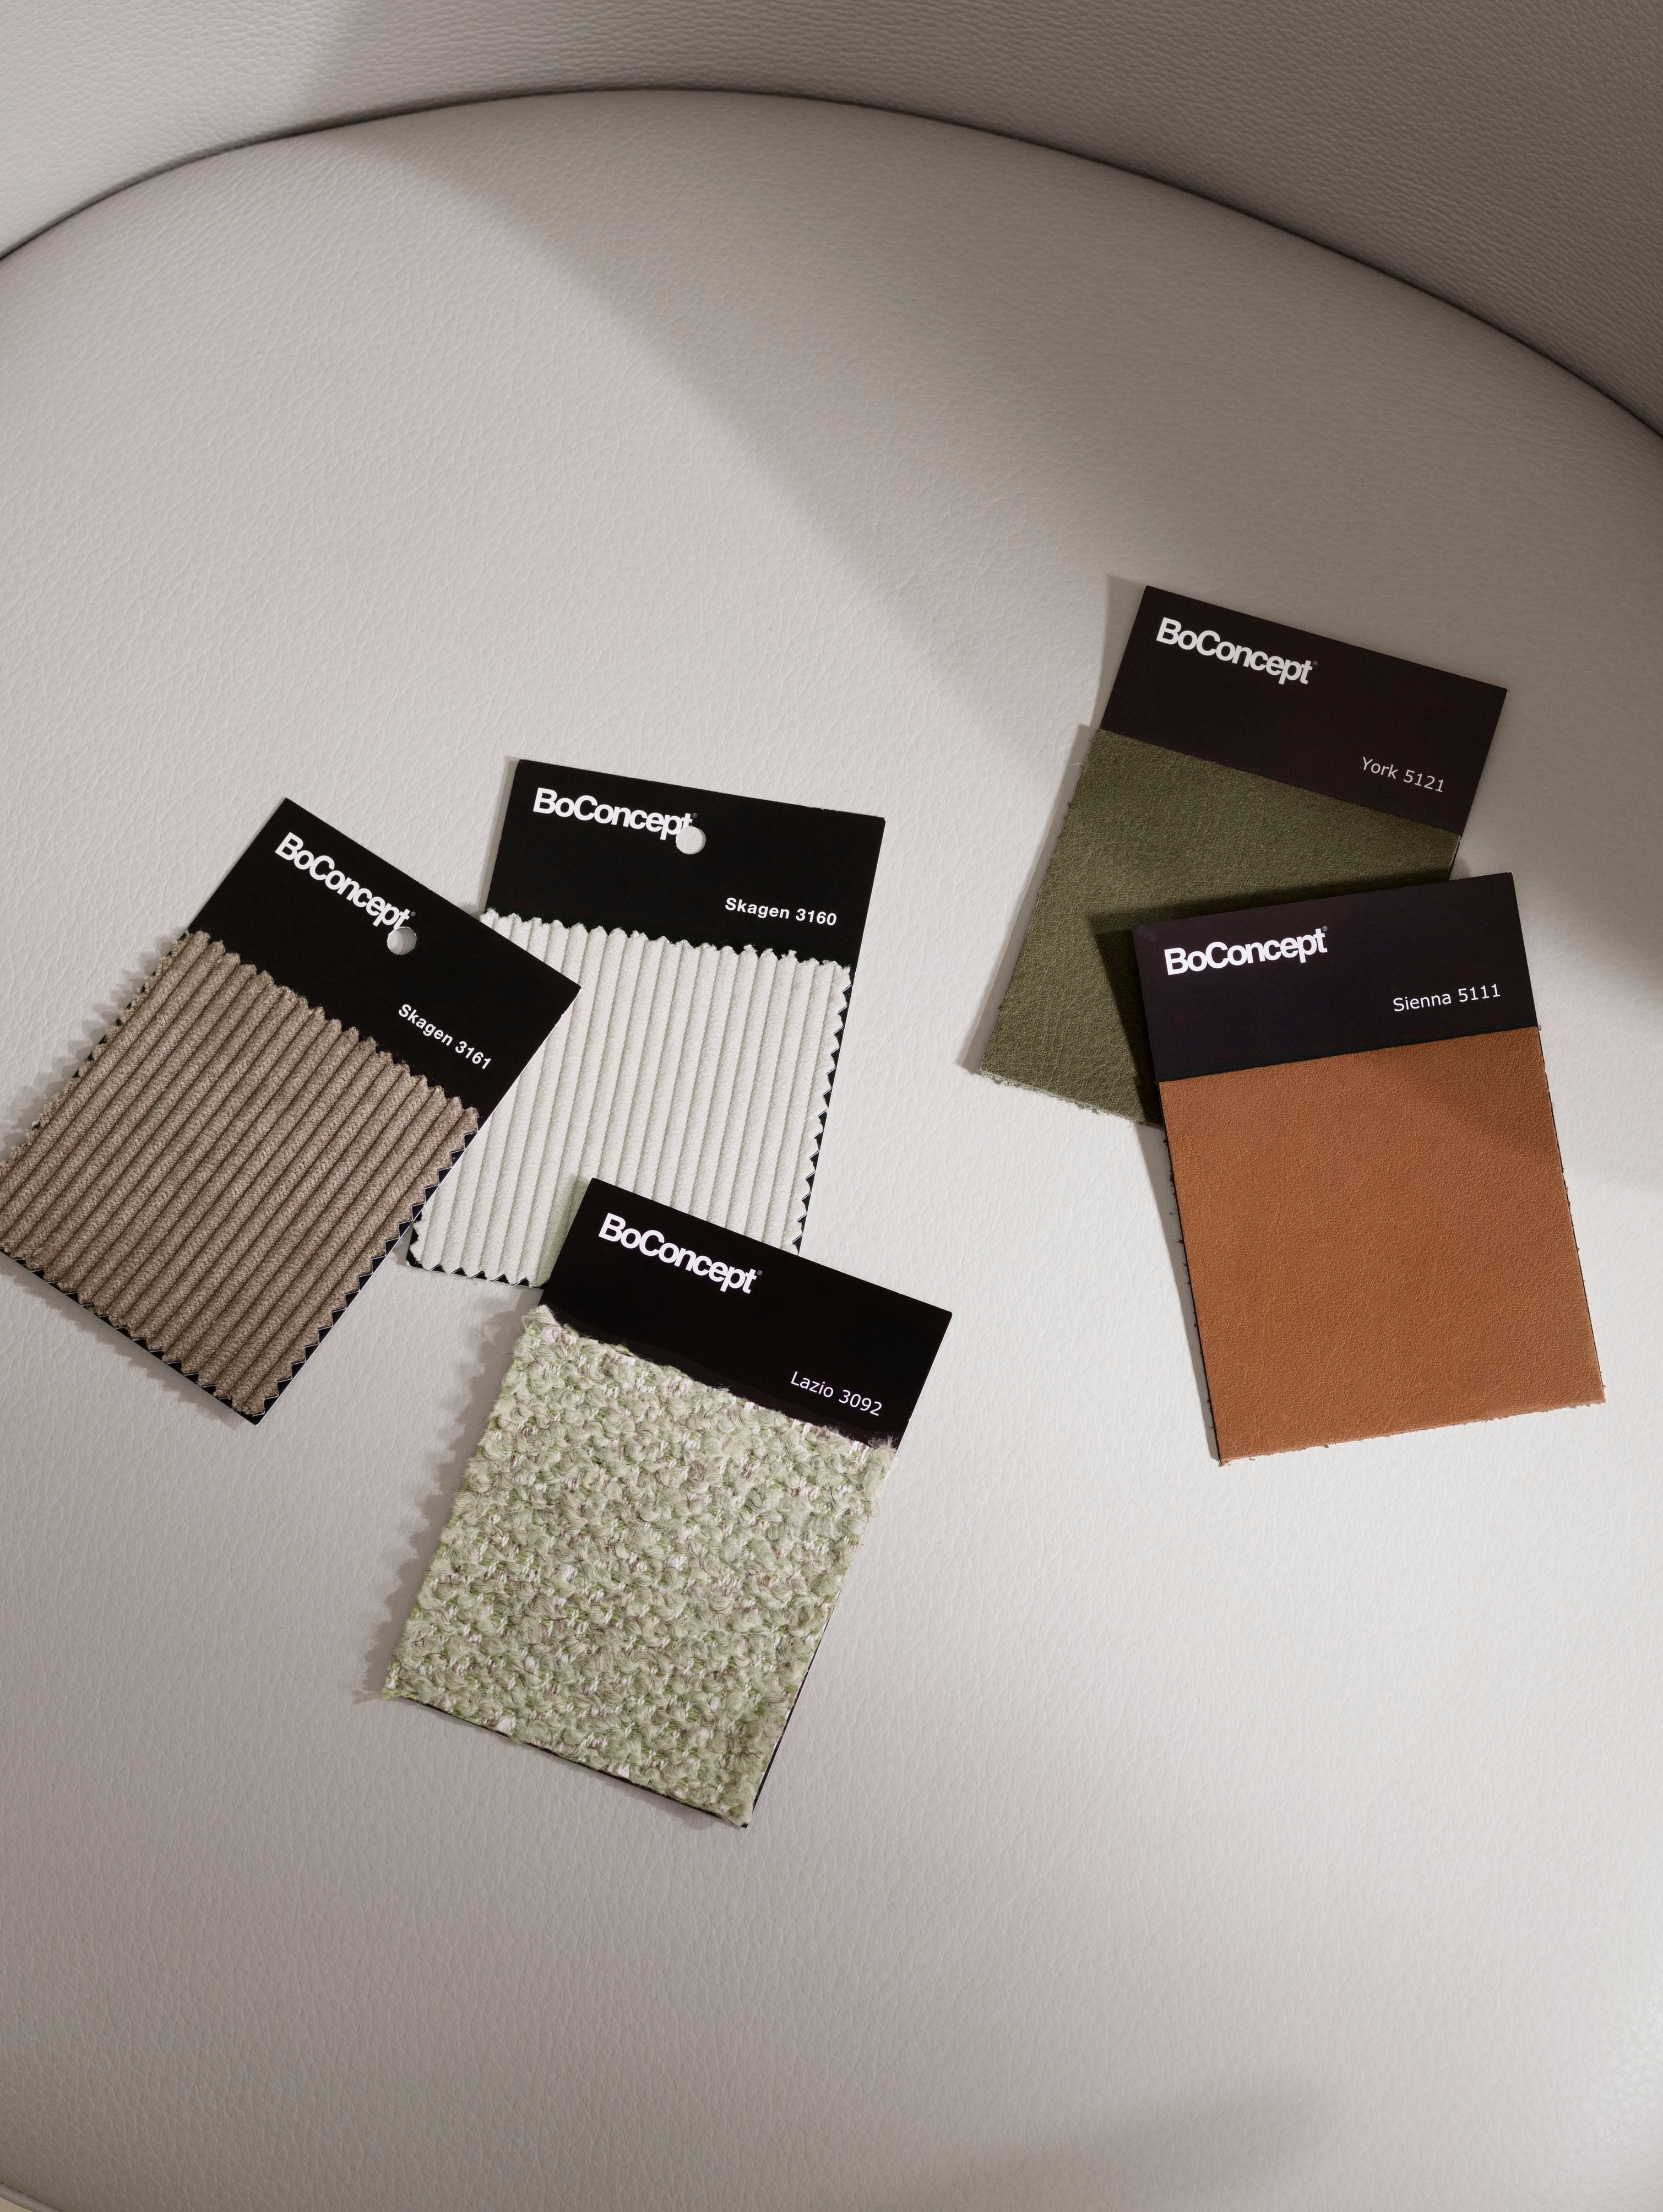 BoConcept fabric samples on a white chair, showcasing various textures and colors.